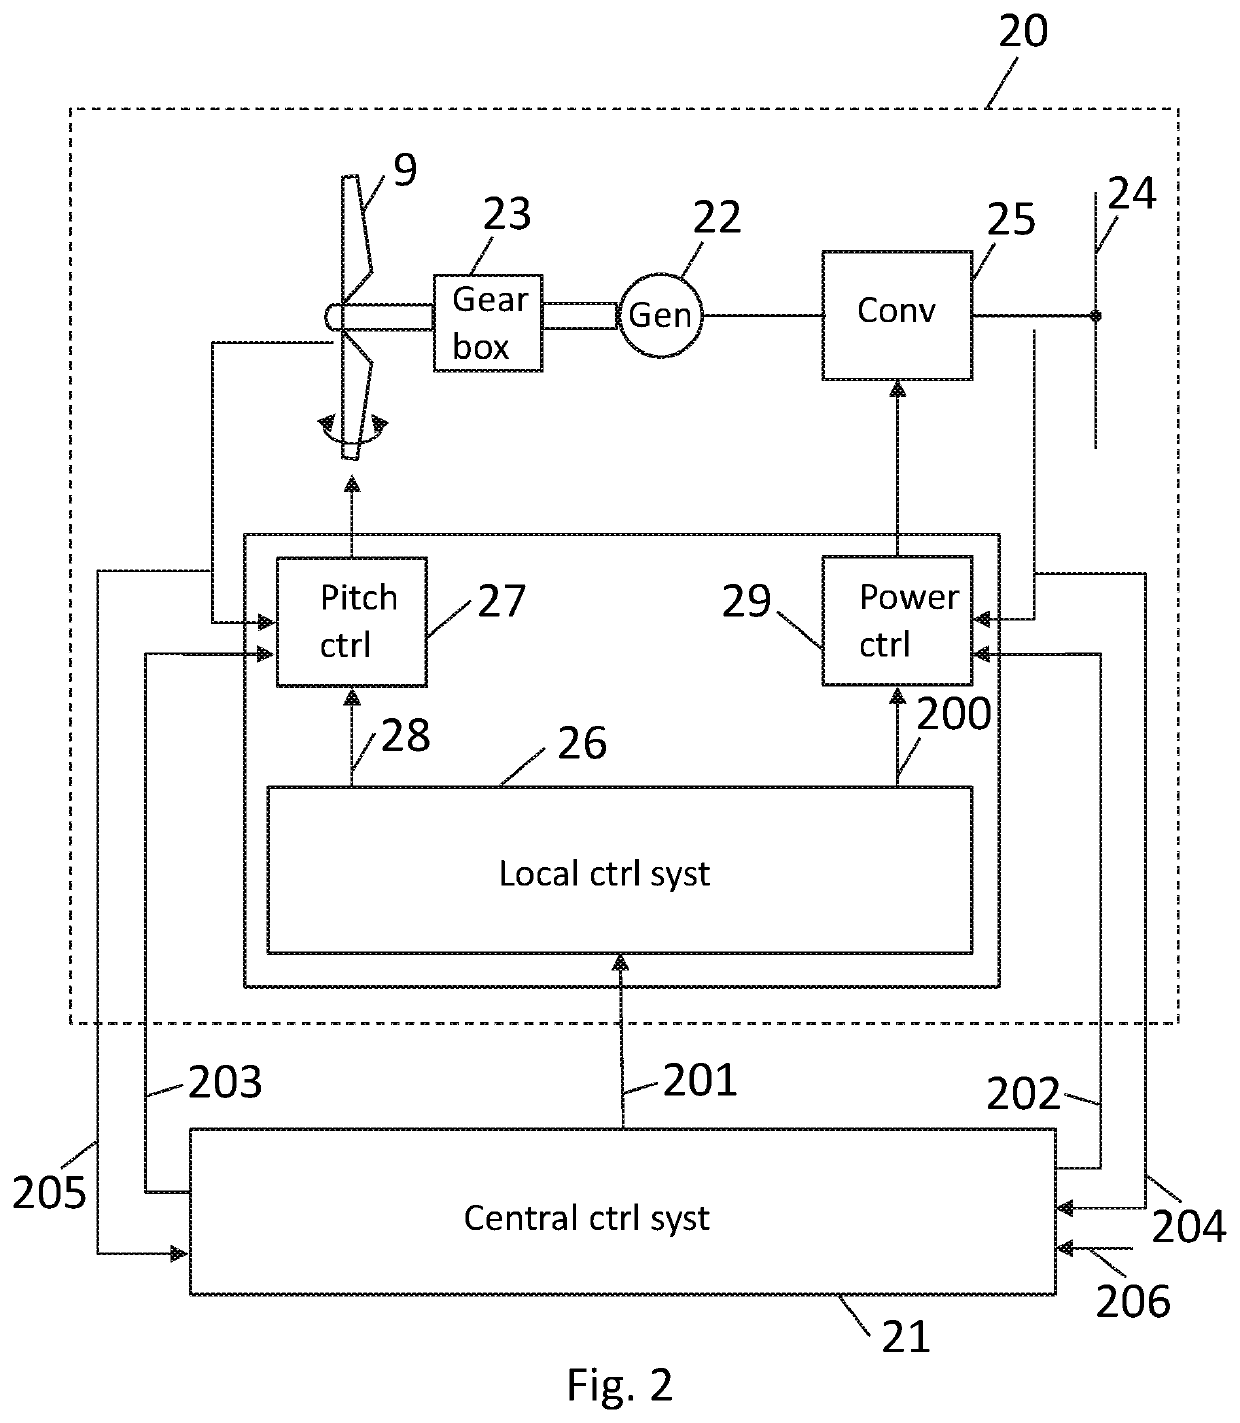 Control of a multi-rotor wind turbine system using a central controller to calculate local control objectives